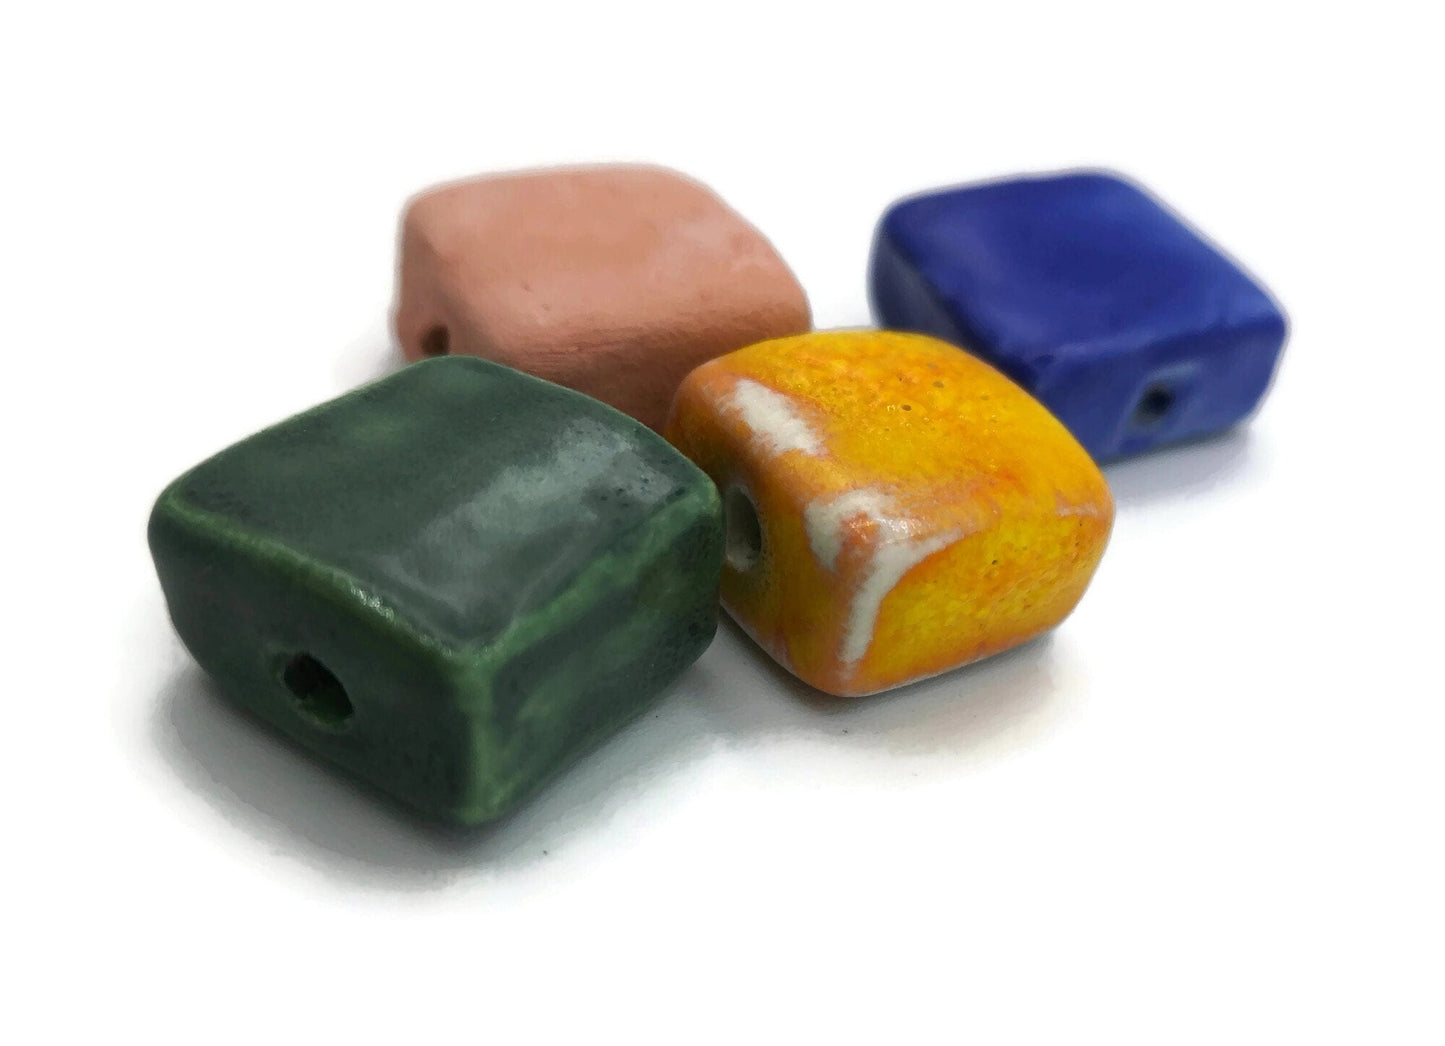 Set Of 4 Assorted Beads, Clay Beads For Crafts, Handmade Ceramic Macrame Beads, Square Shape Large Beads, Unusual Pottery Beads - Ceramica Ana Rafael